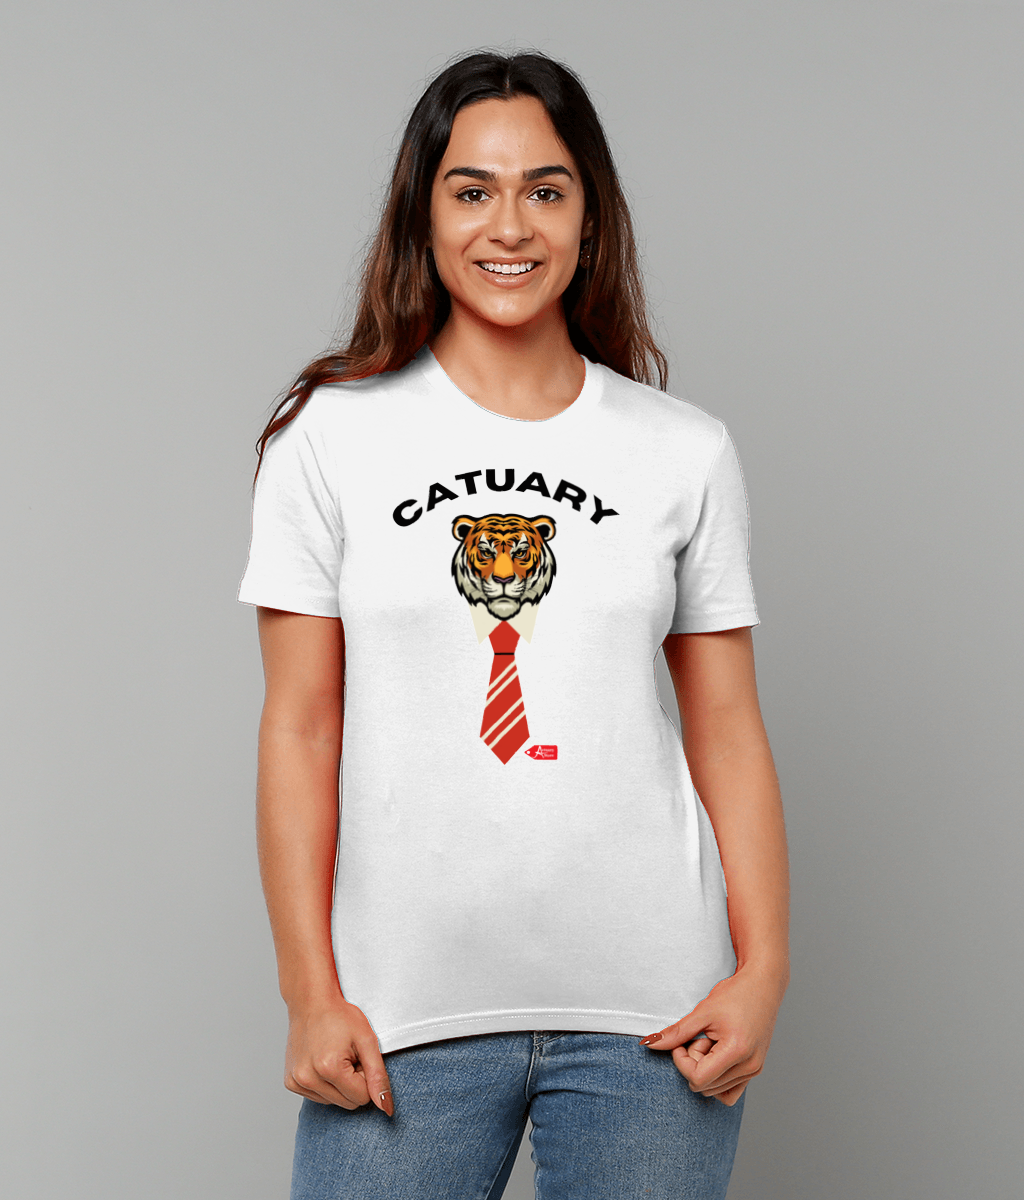 Catuary Tiger in Tie T-Shirt